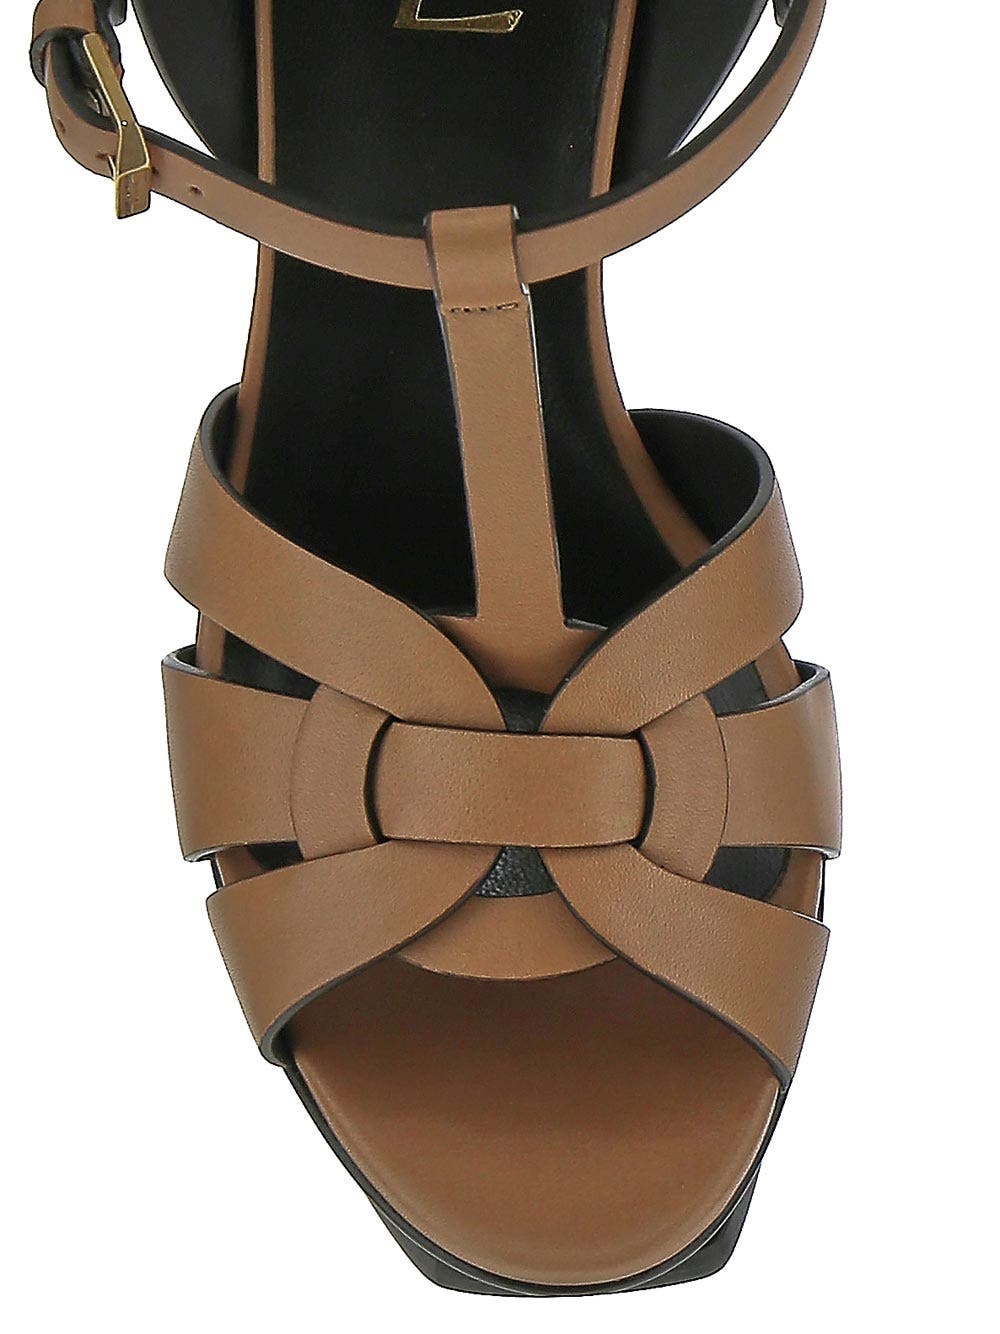 Tribute Platform Sandals in Vegetable-Tanned Leather - 4